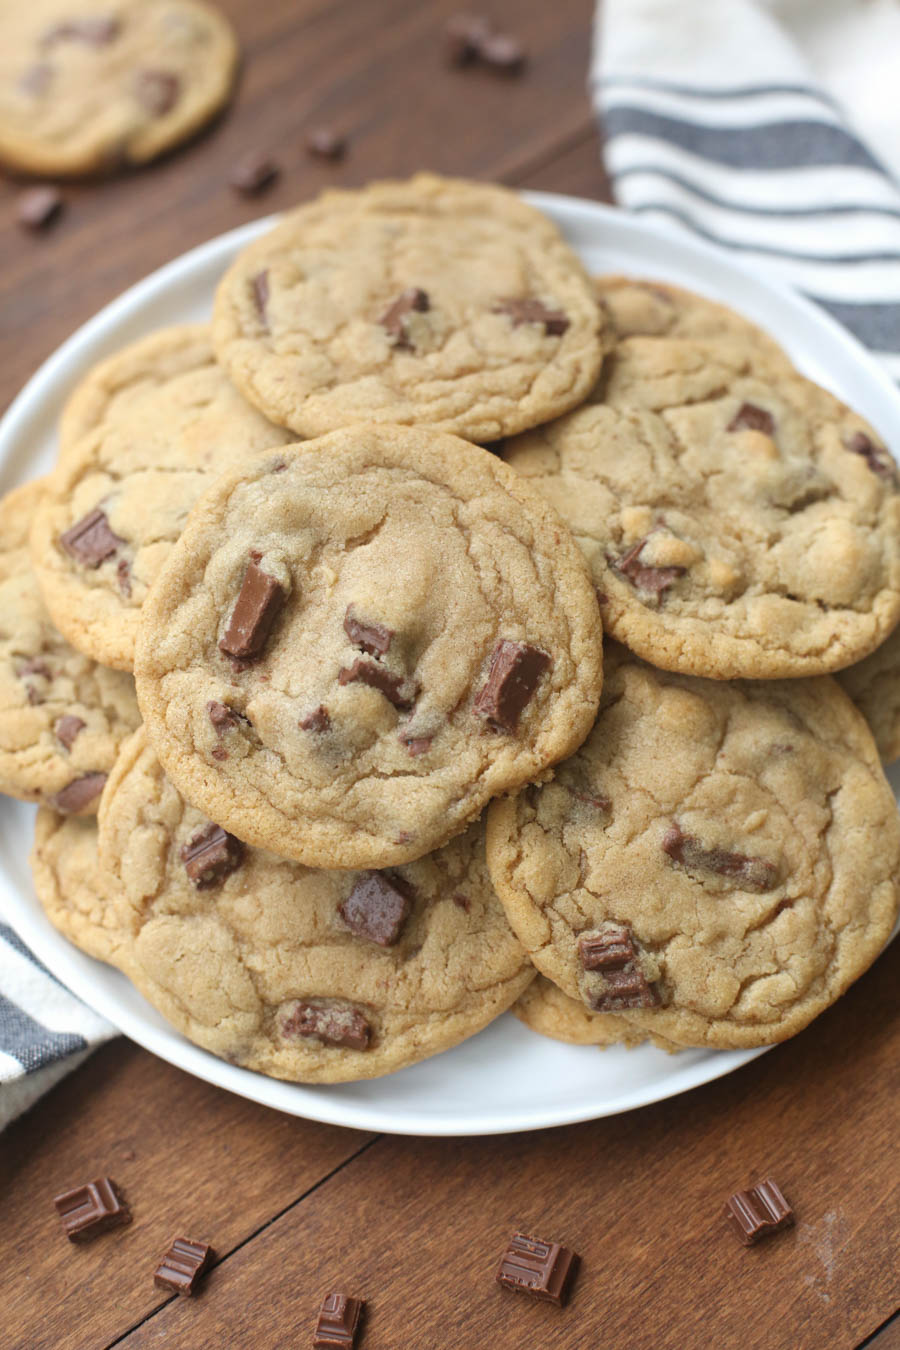 LIMITED TIME Peanut Butter Chocolate Chip Cookie Dough - 3# Box 48 ct.